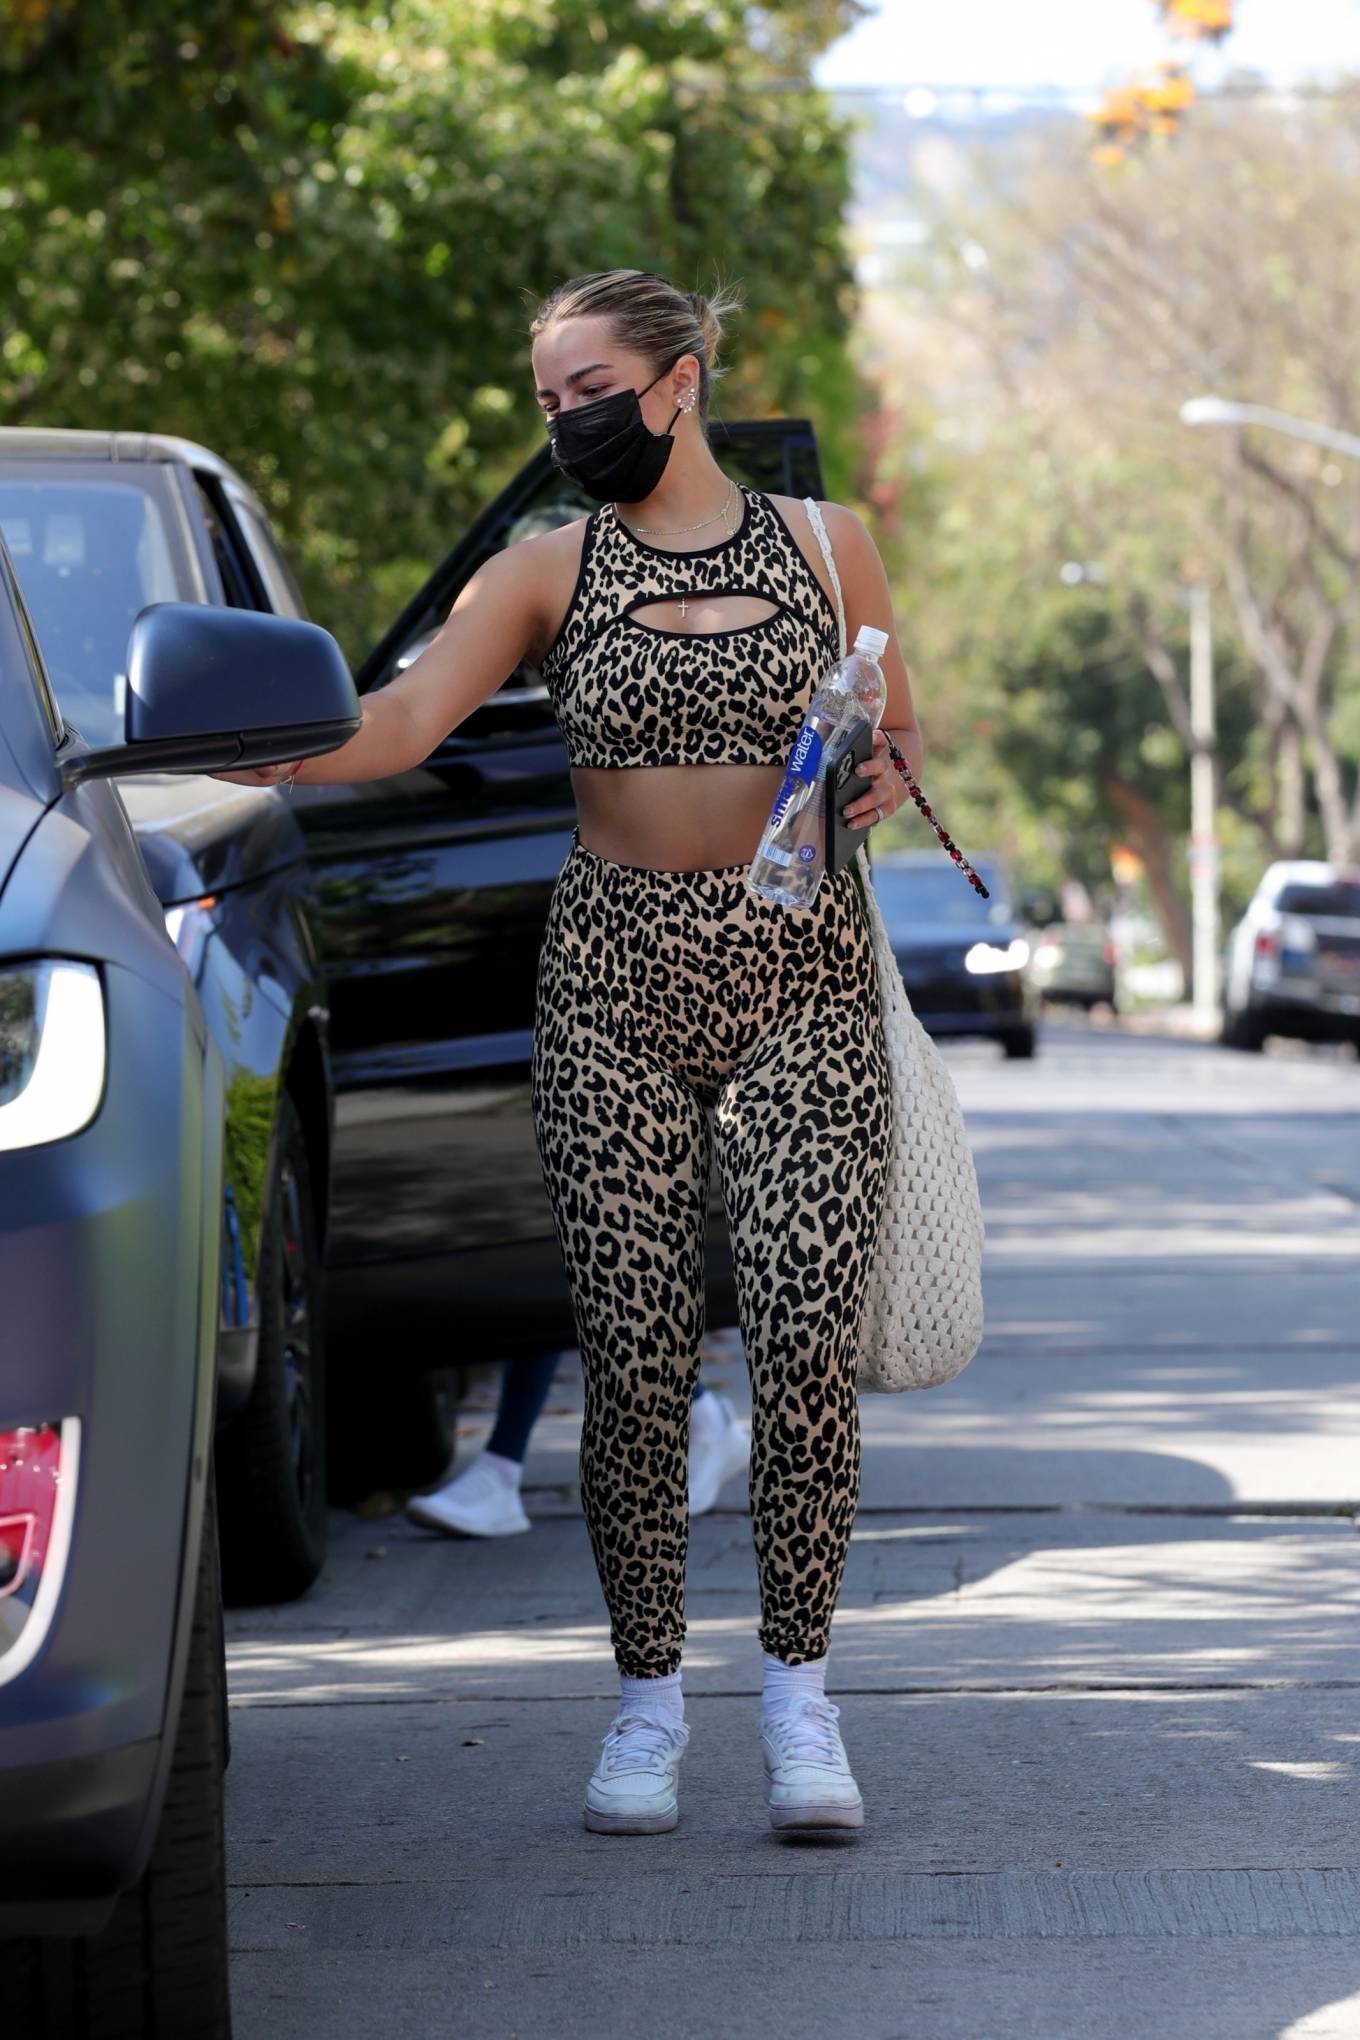 Addison Rae 2021 : Addison Rae – In a leopard print yoga outfit in West Hollywood-09